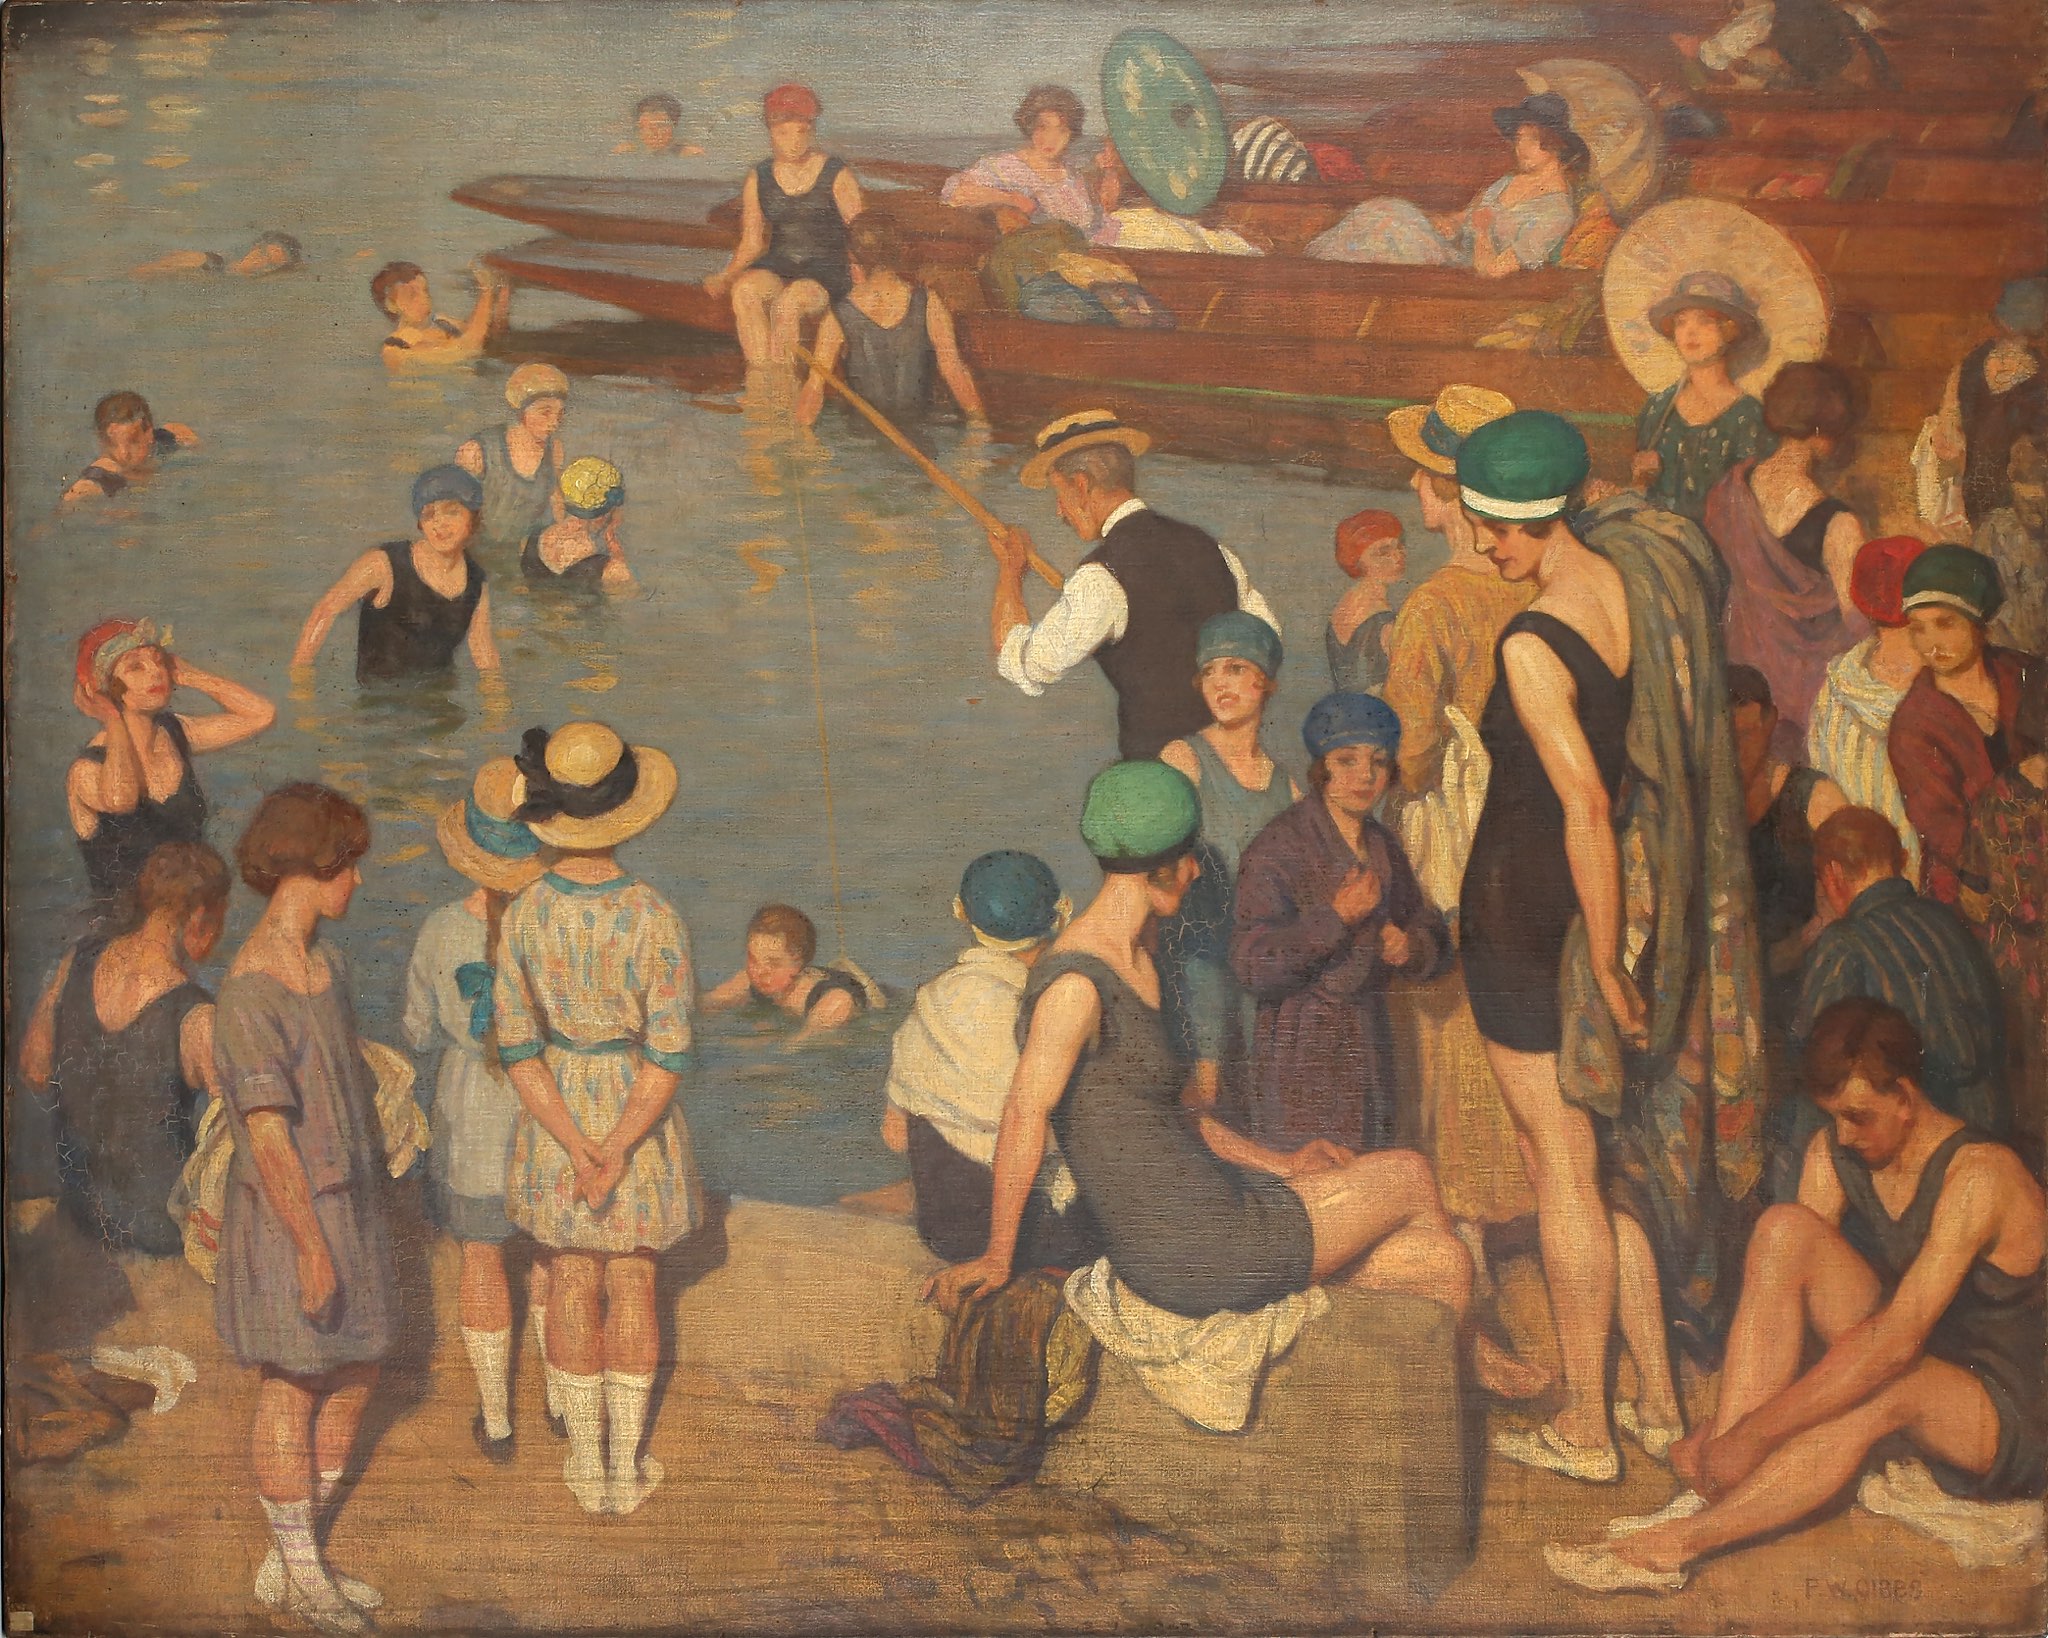 Percy William Gibbs (1894-1937), 'The Bathers', oil on canvas, signed lower right, circa 1930,